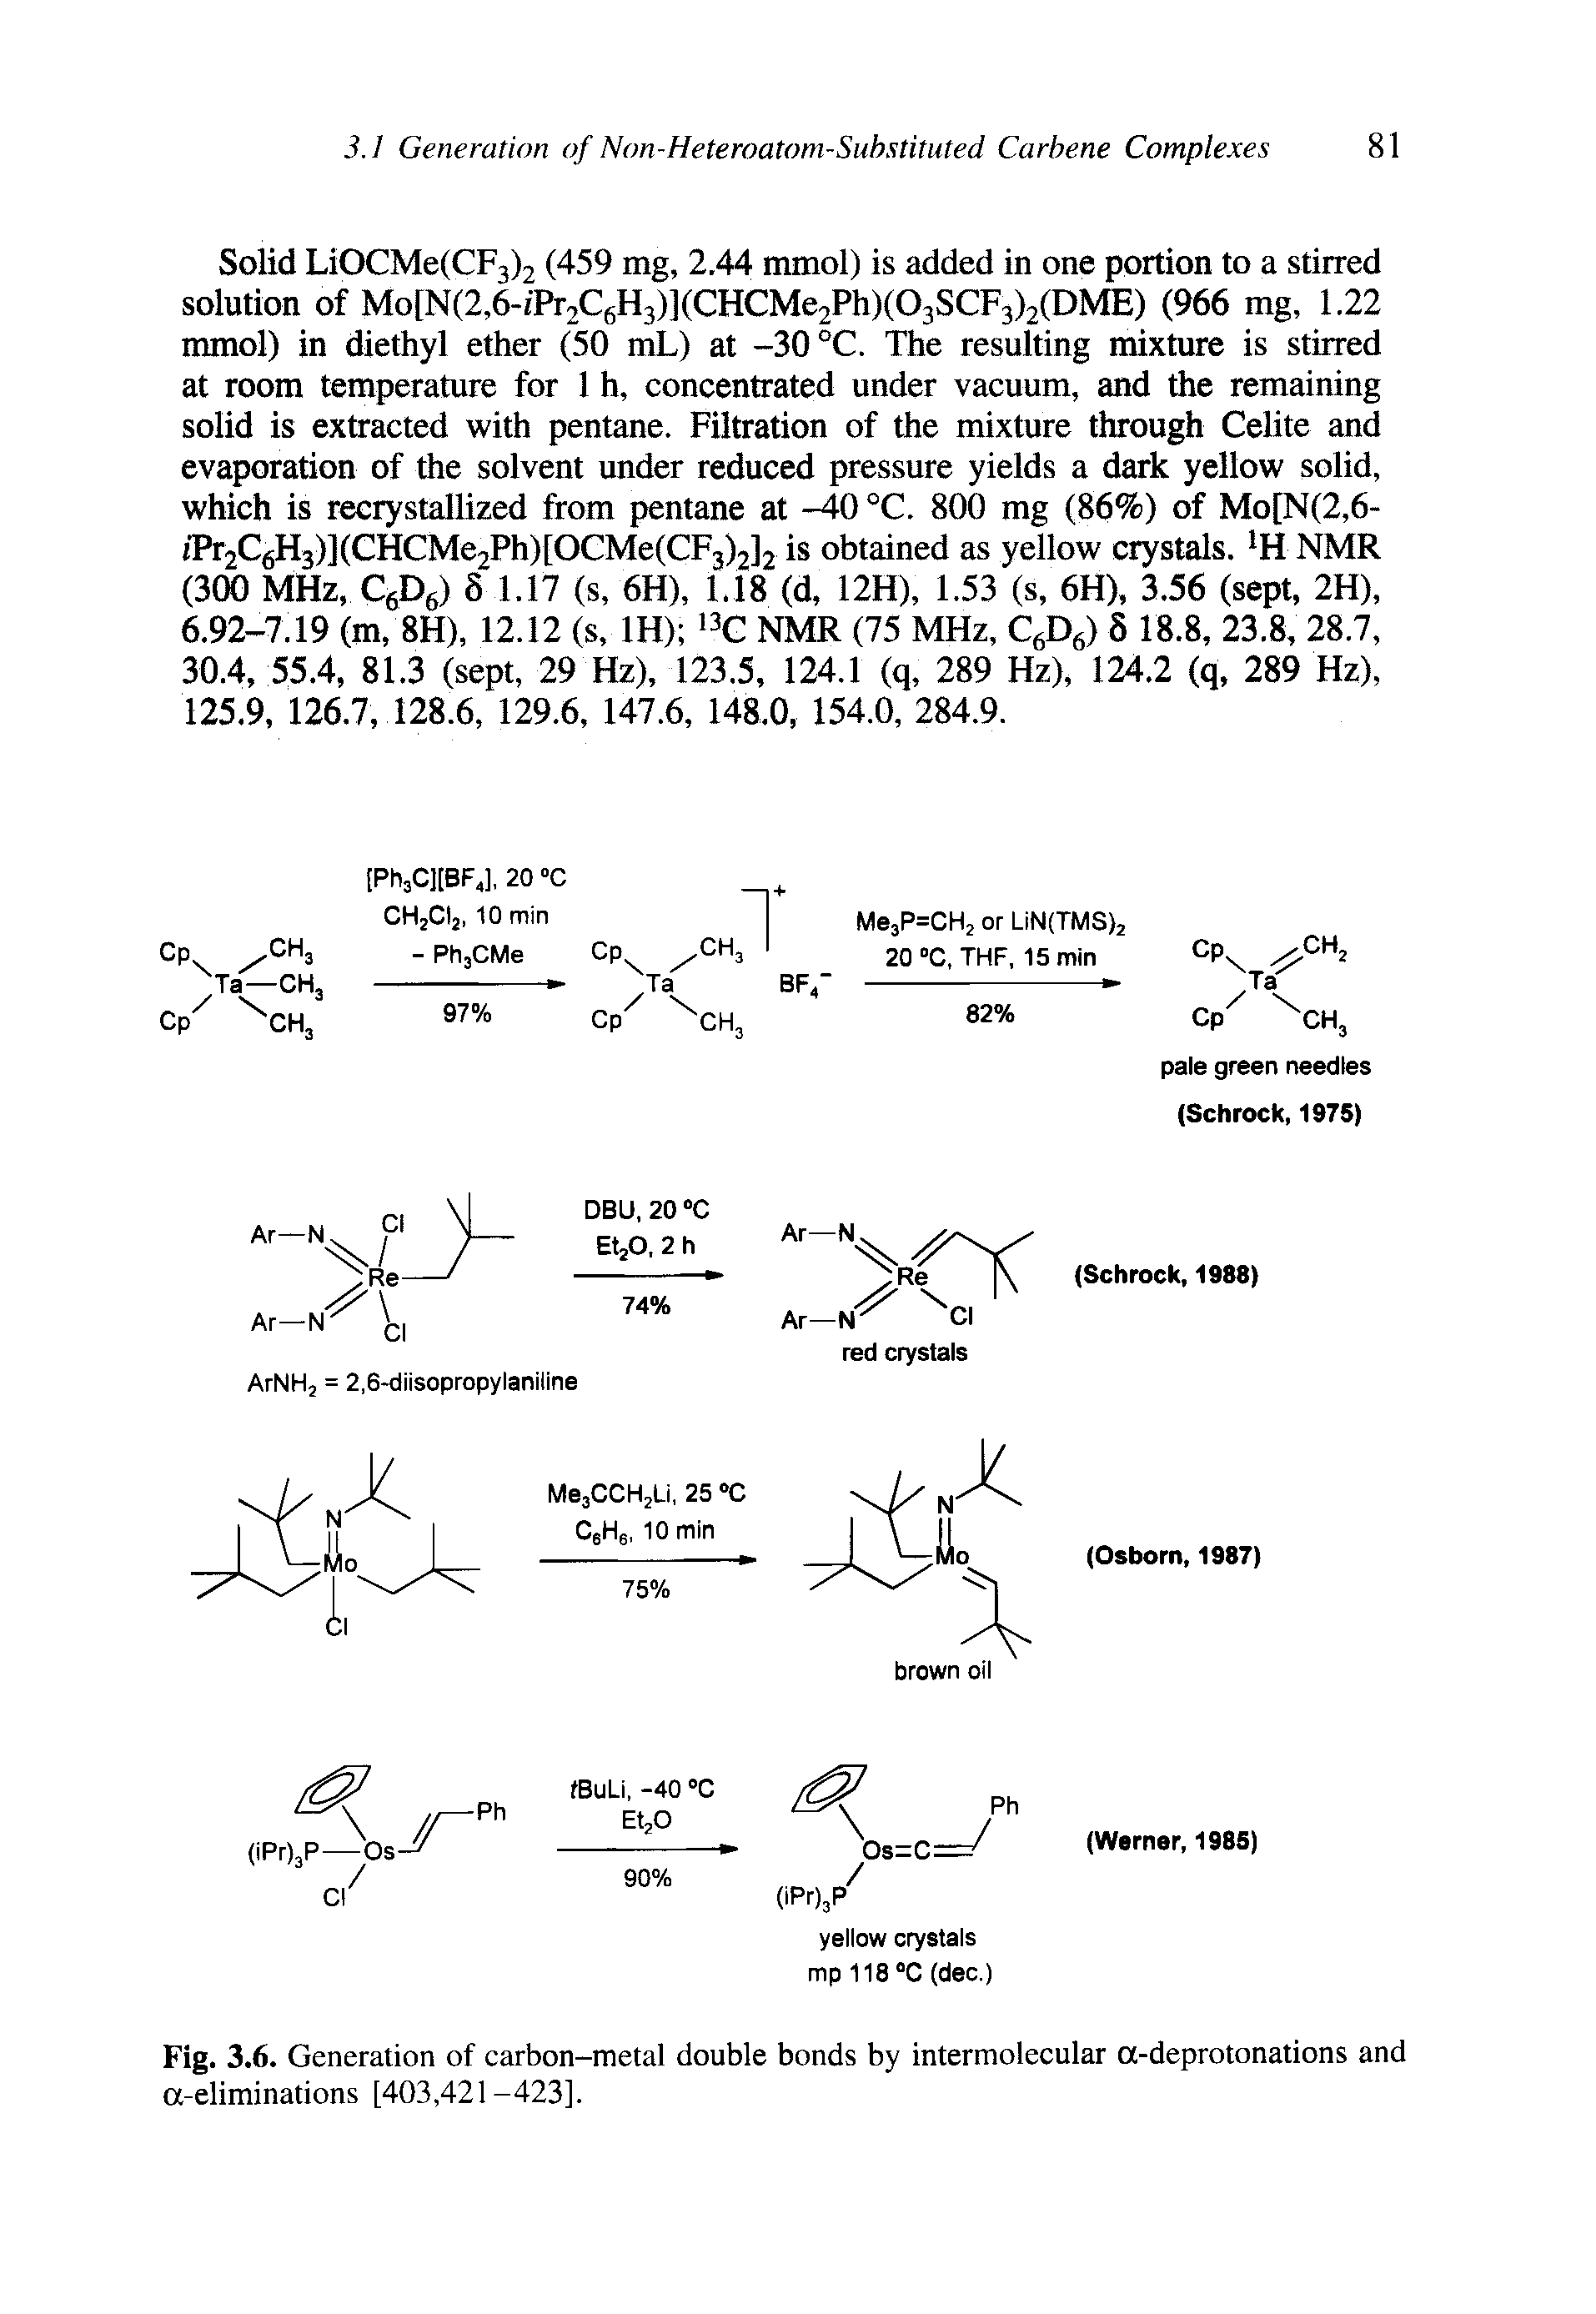 Fig. 3.6. Generation of carbon-metal double bonds by intermolecular a-deprotonations and a-eliminations [403,421-423].